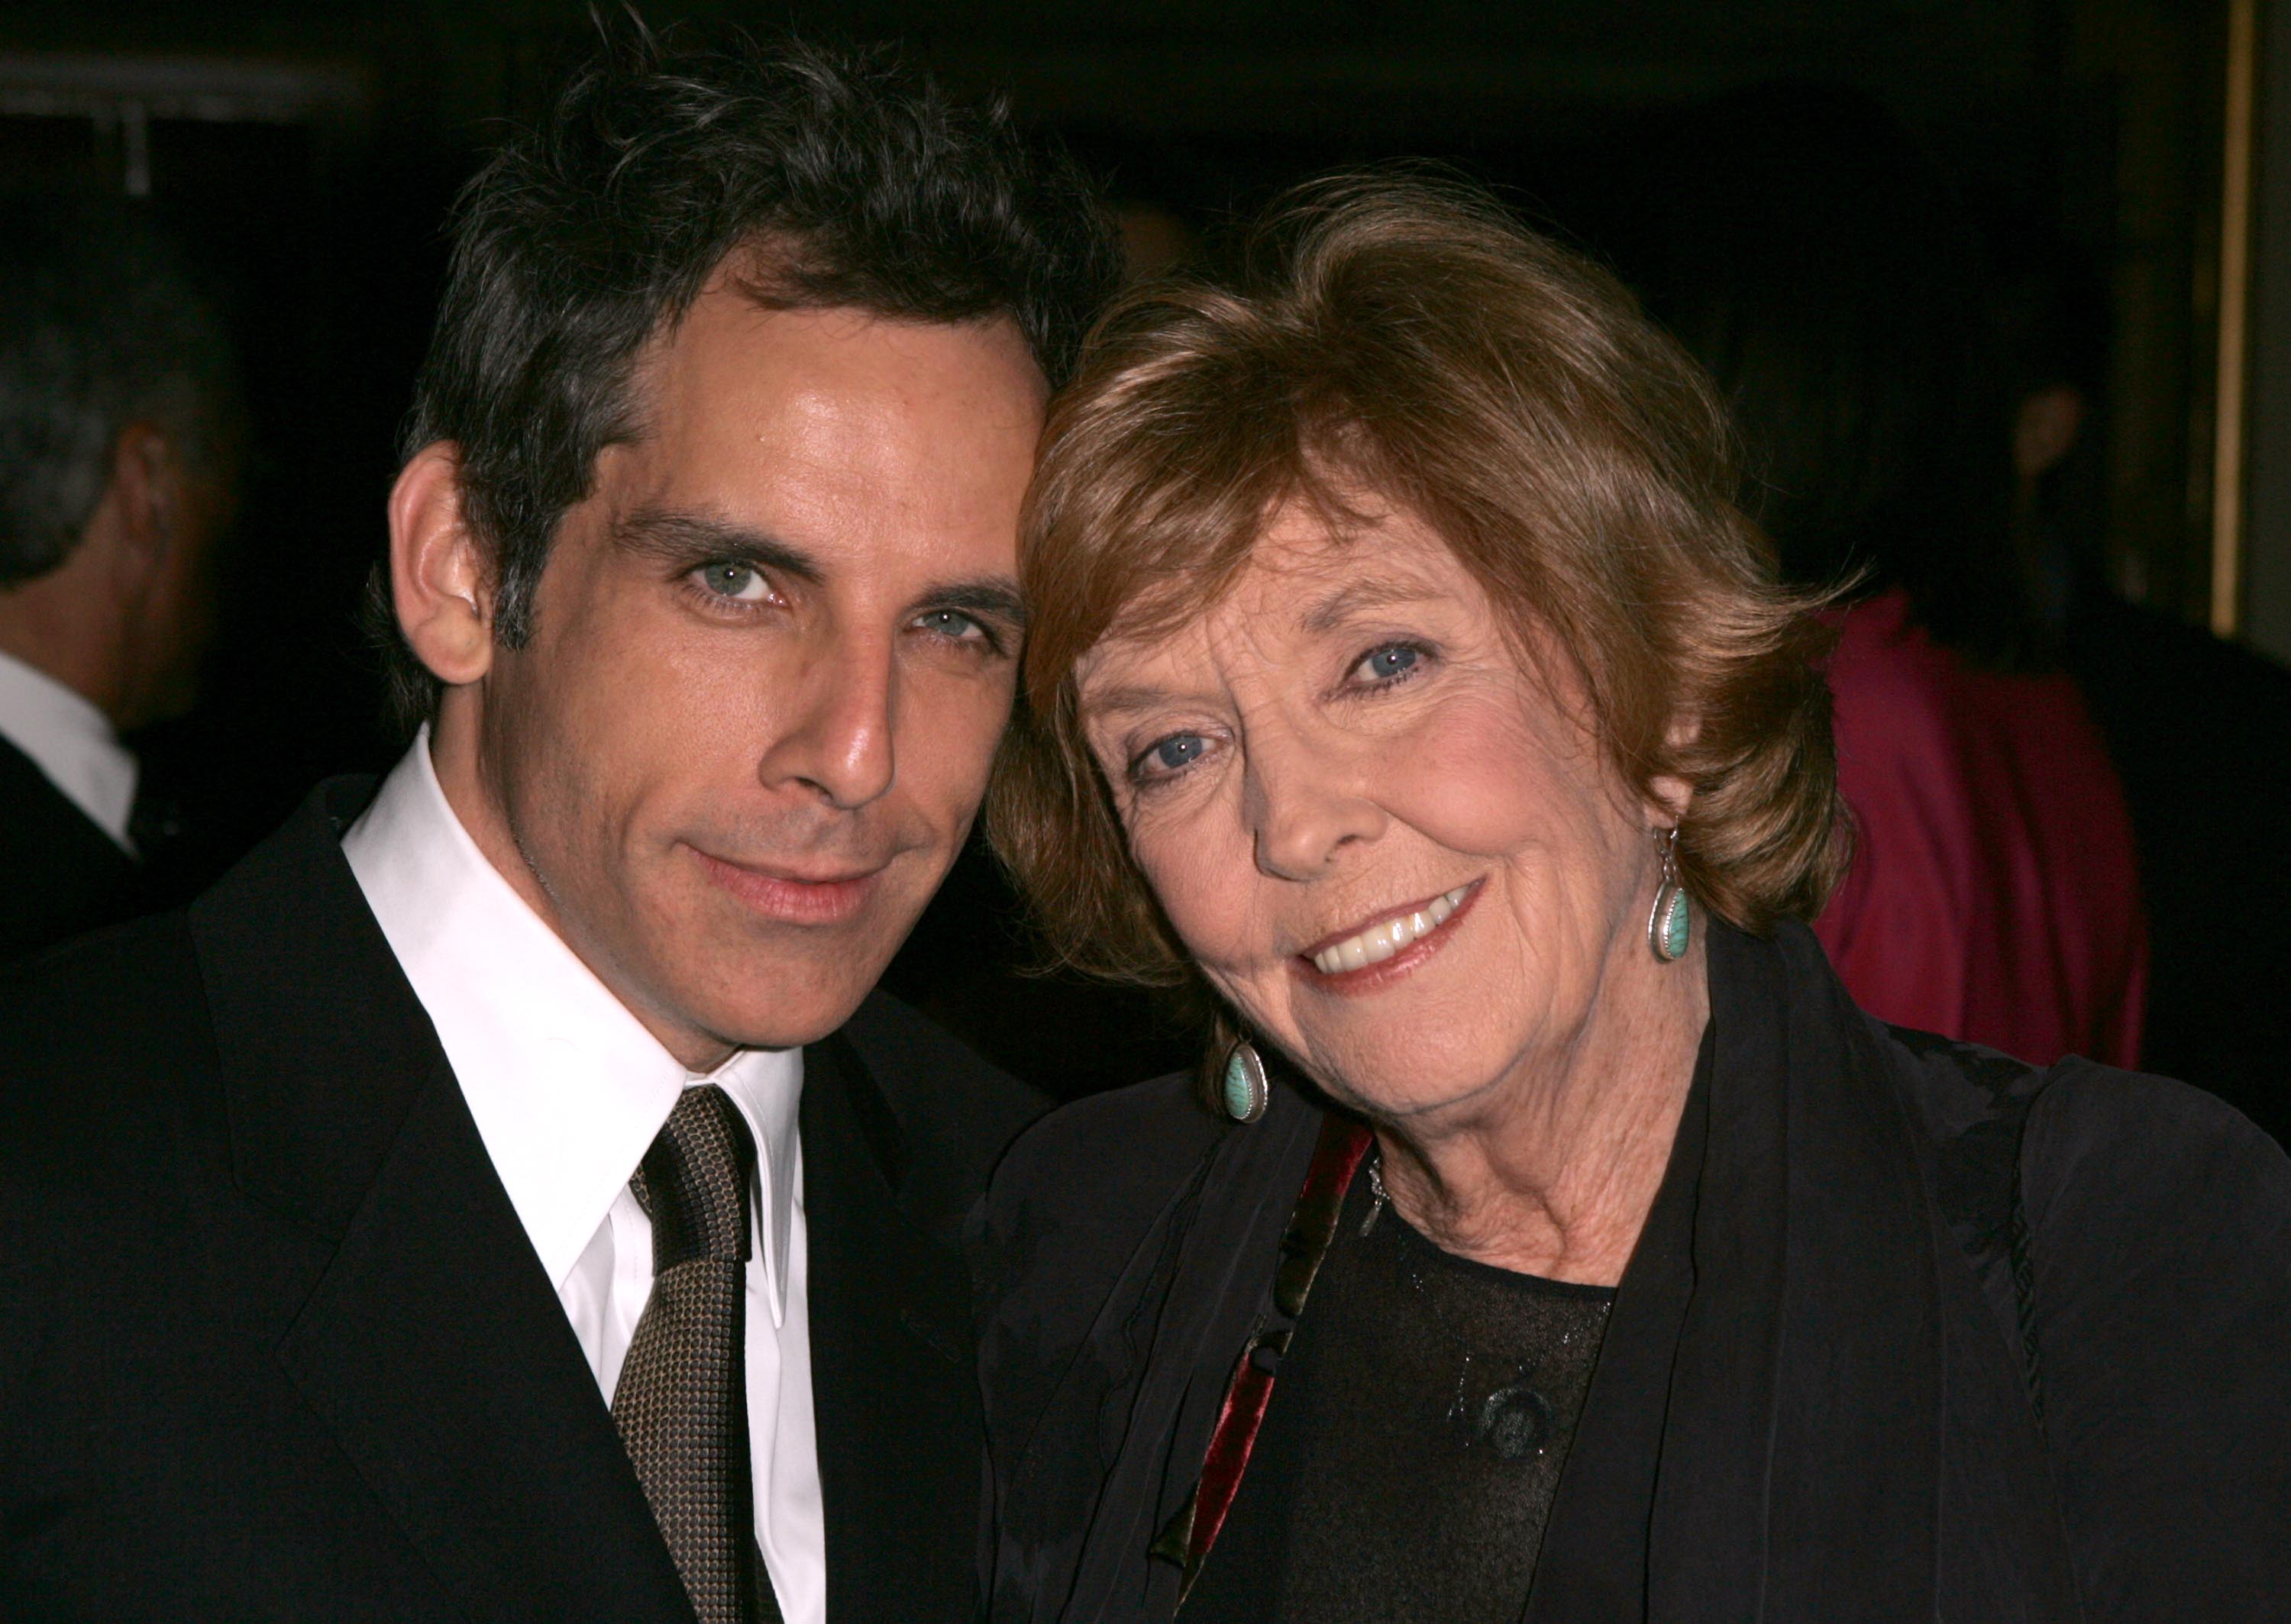  Ben Stiller and mother Anne Meara at the Yves Saint Laurent Grand classics Screening of 'Sweet Smell of Sucess' hosted by Ben Stiller and Christine Taylor at the Playboy Mansion in 2004 in Bel Air, California | Photo: Frazer Harrison/Getty Images